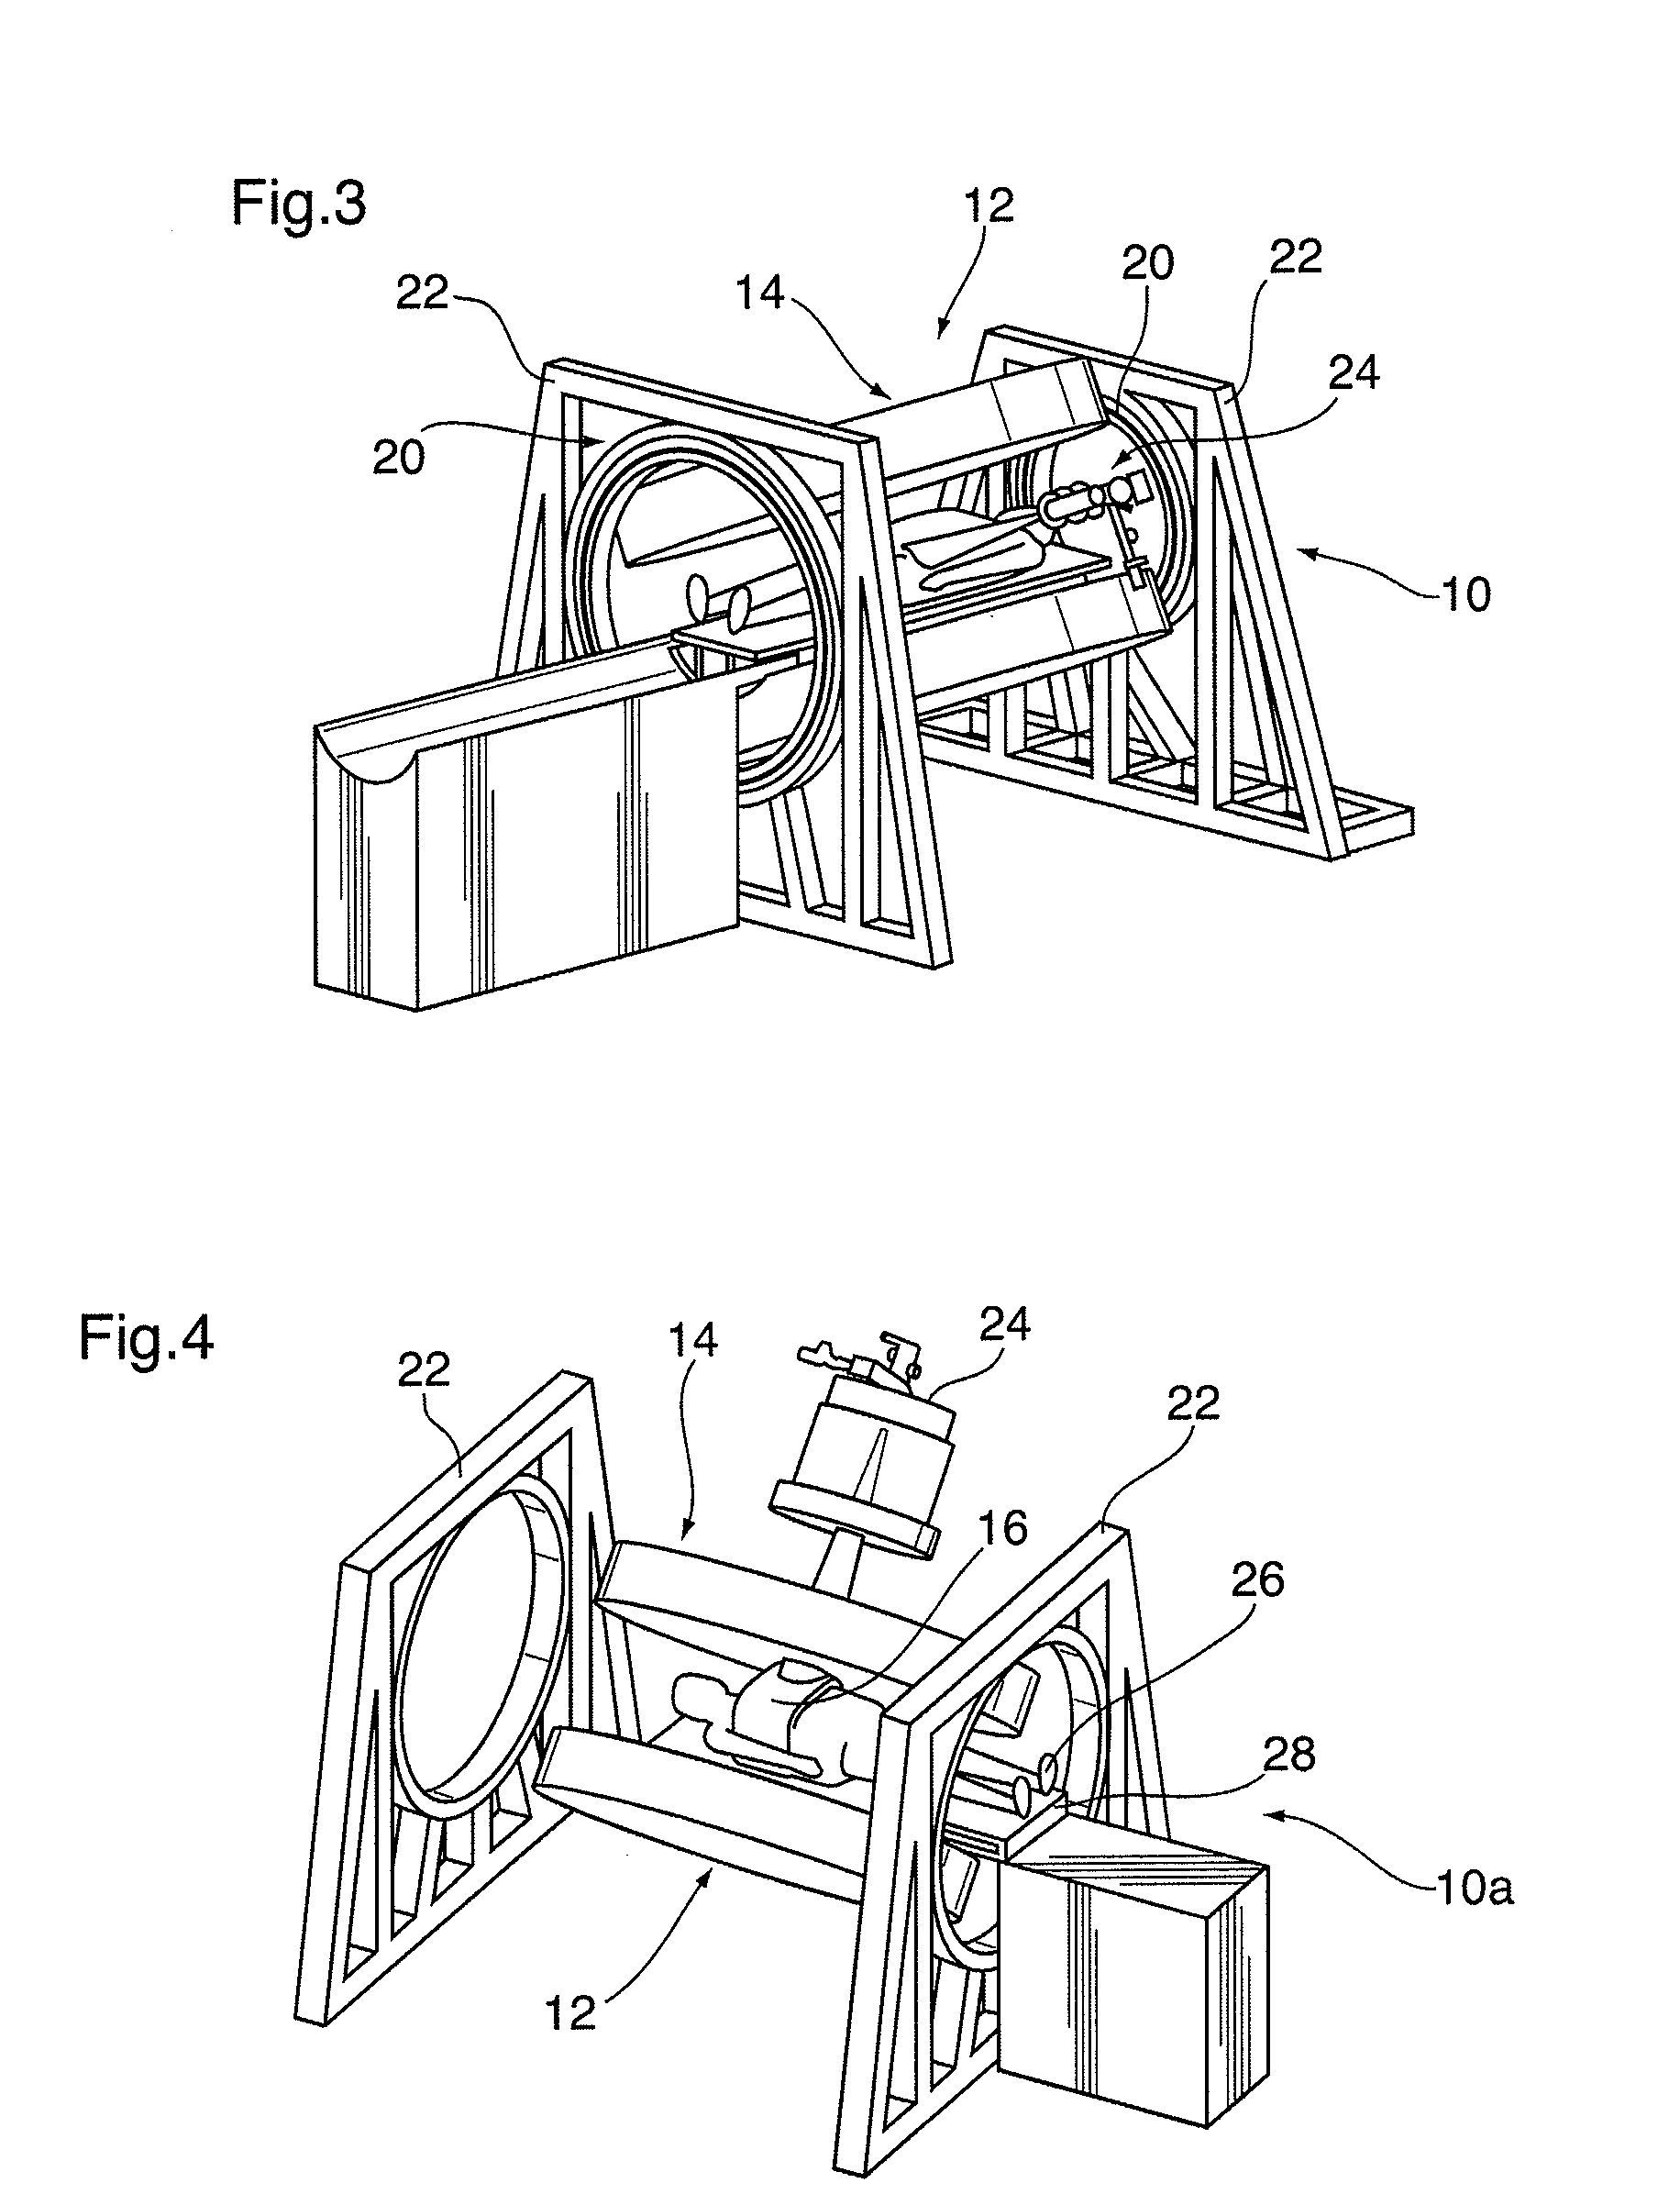 Image guided radiation therapy system and shielded radio frequency detector coil for use therein